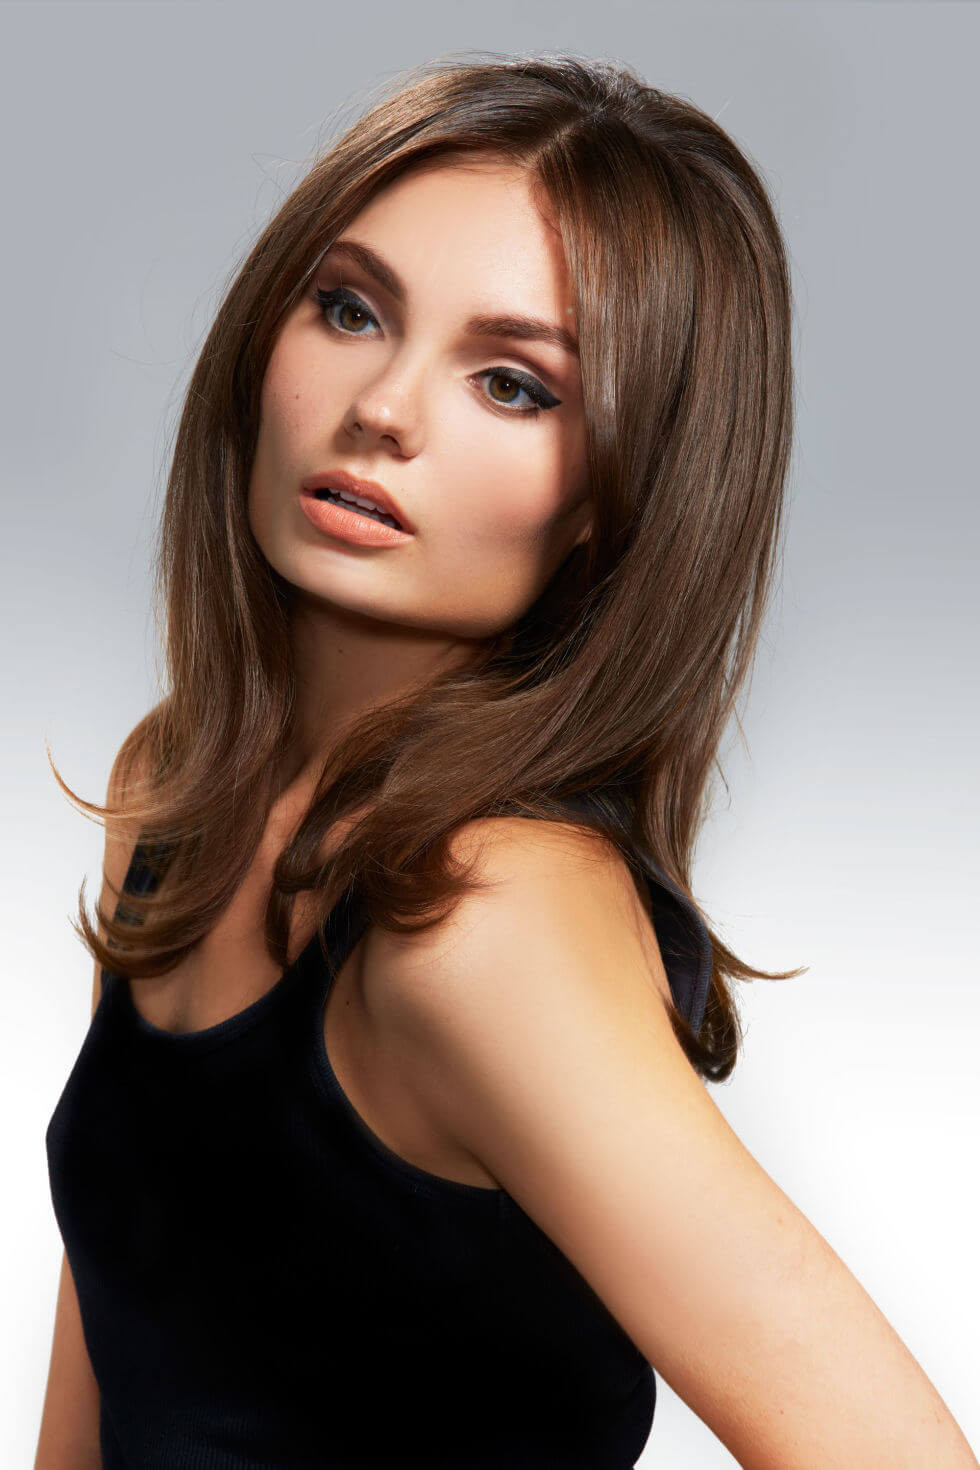 Hairstyle For Medium Hair Length
 The Prettiest Hairstyles Shoulder Length